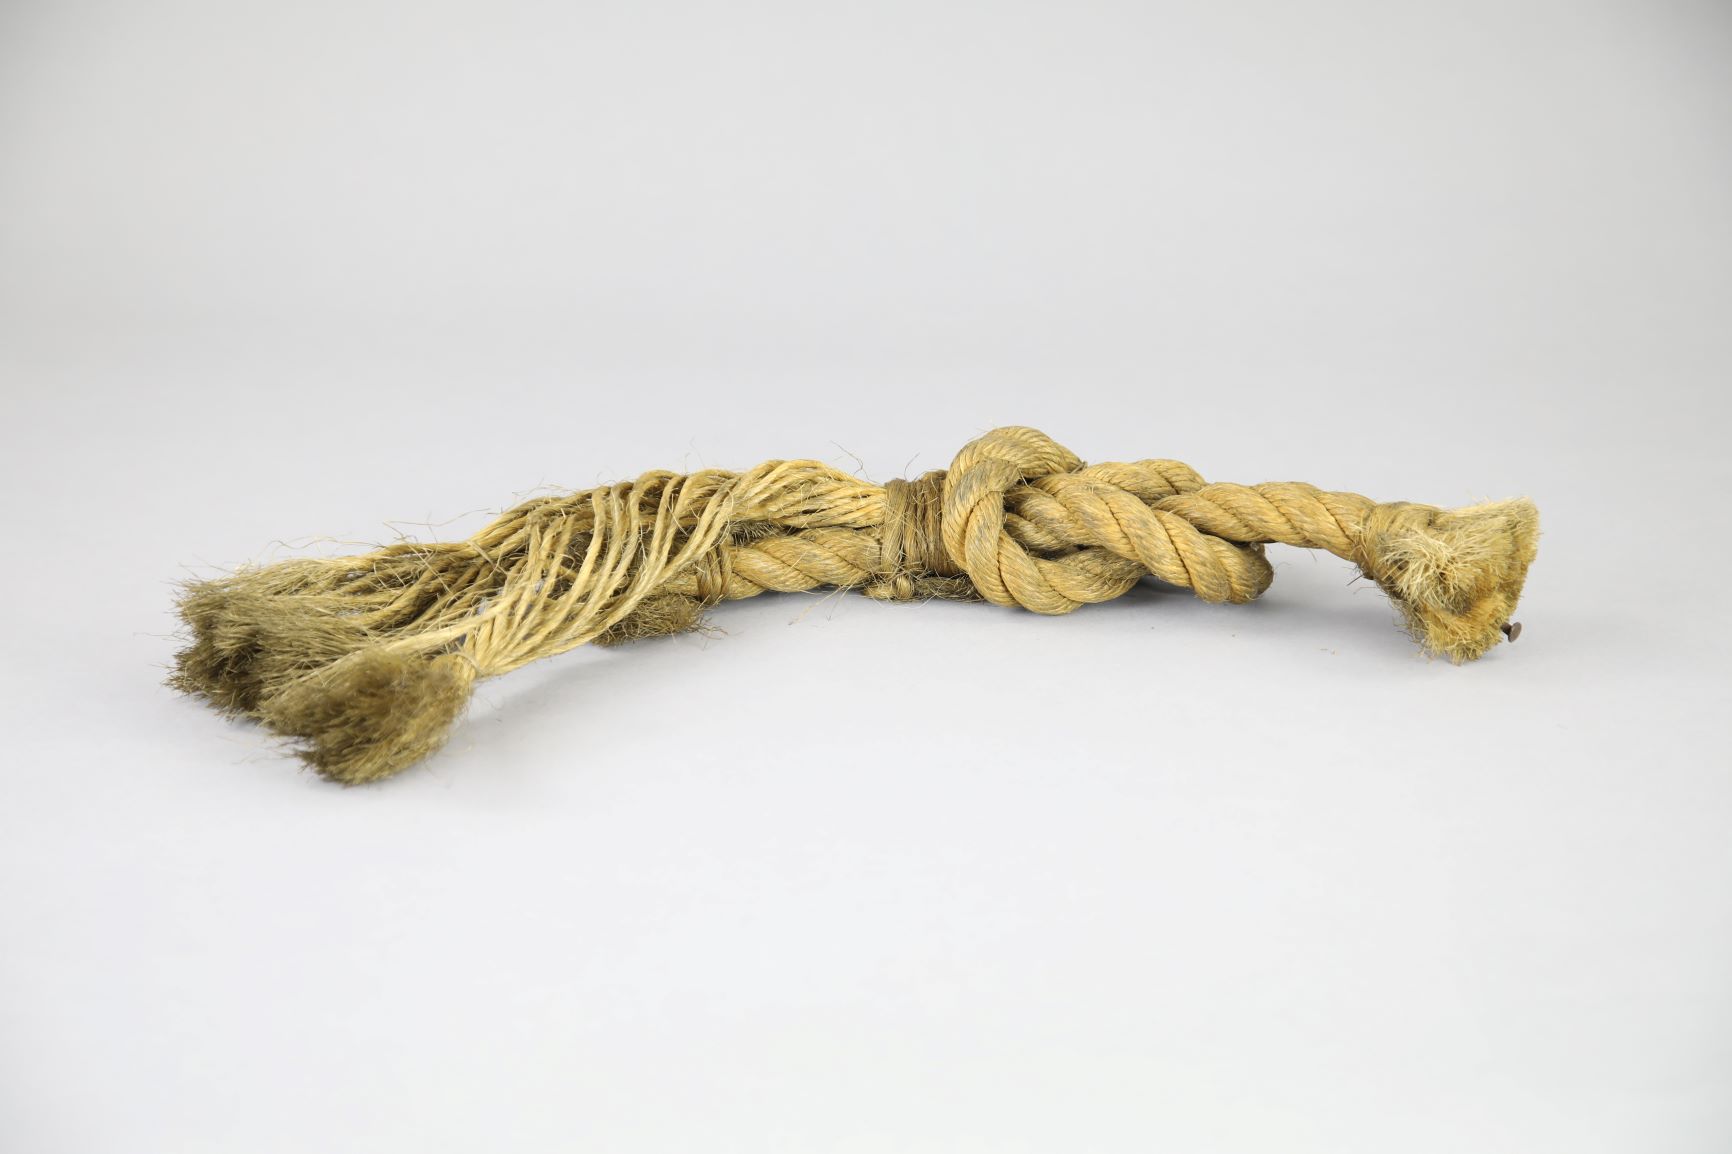 Image of a piece of rope.